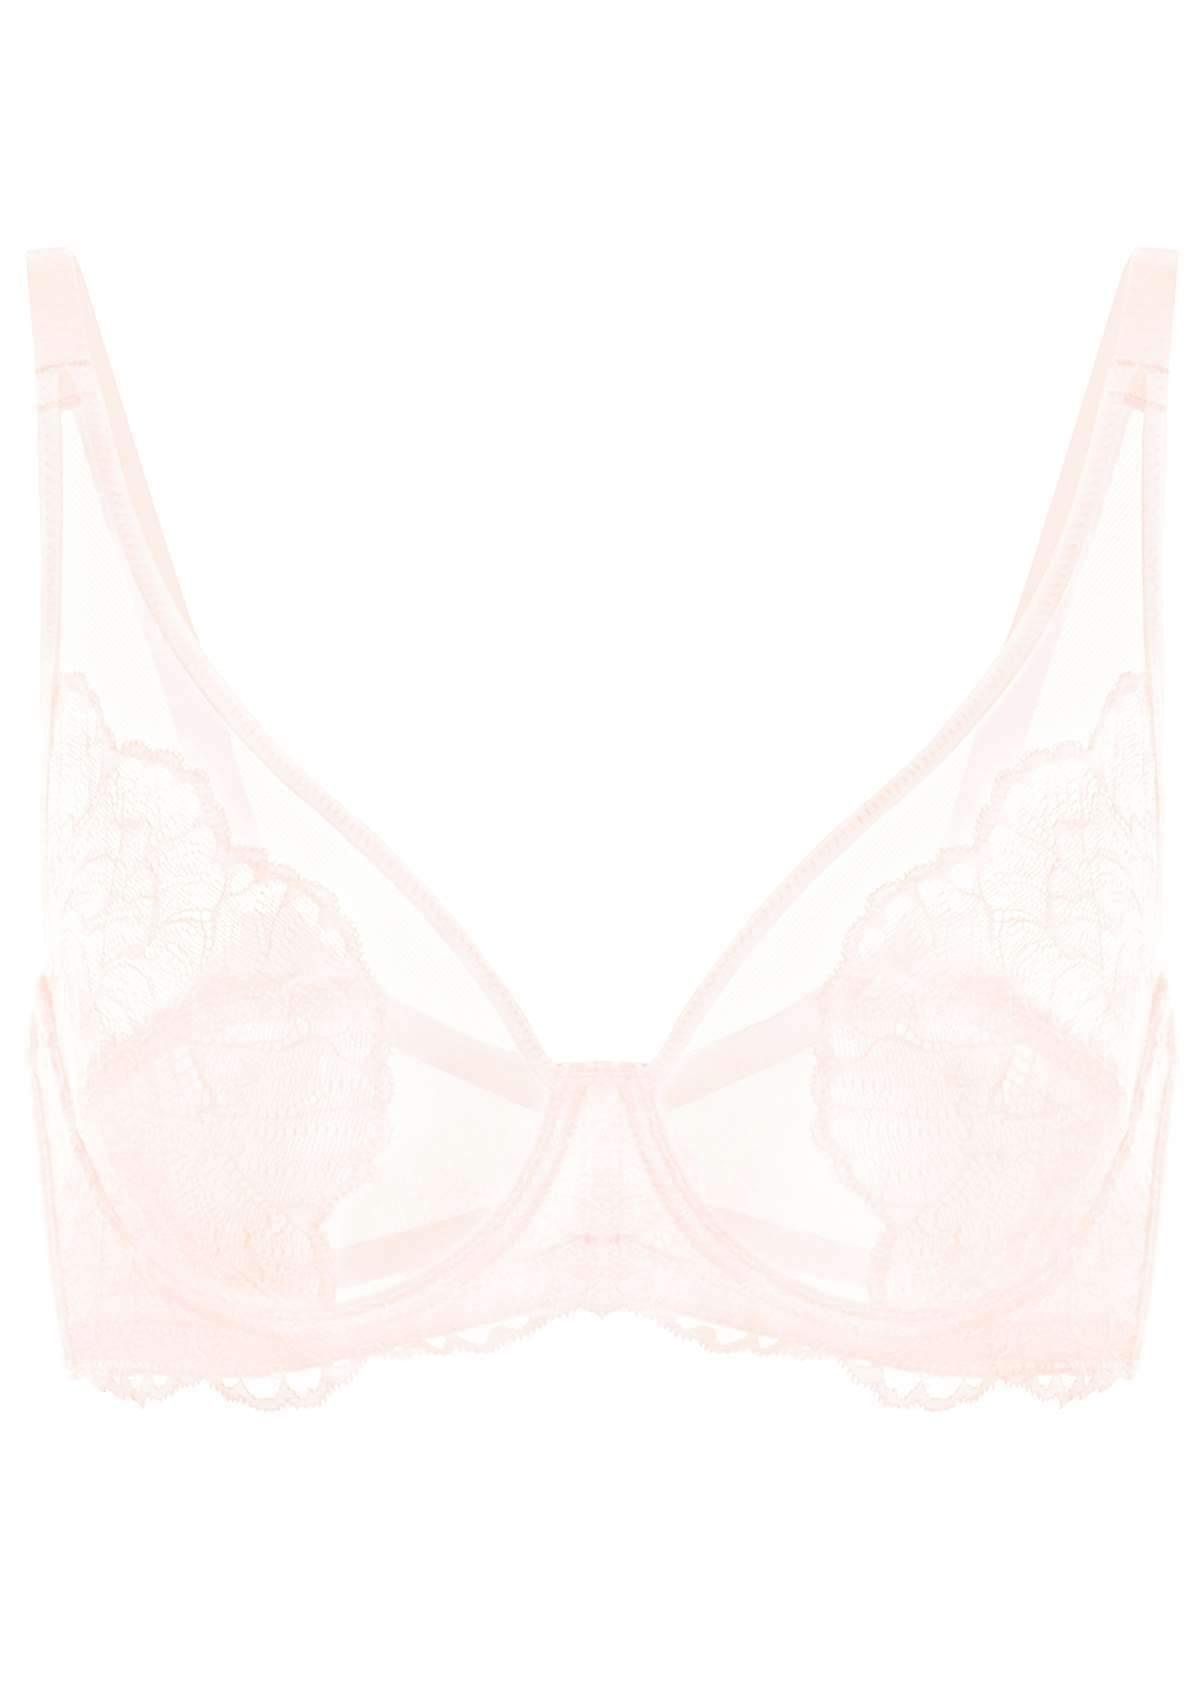 HSIA Blossom Sheer Lace Bra: Comfortable Underwire Bra For Big Busts - Dusty Peach / 40 / D